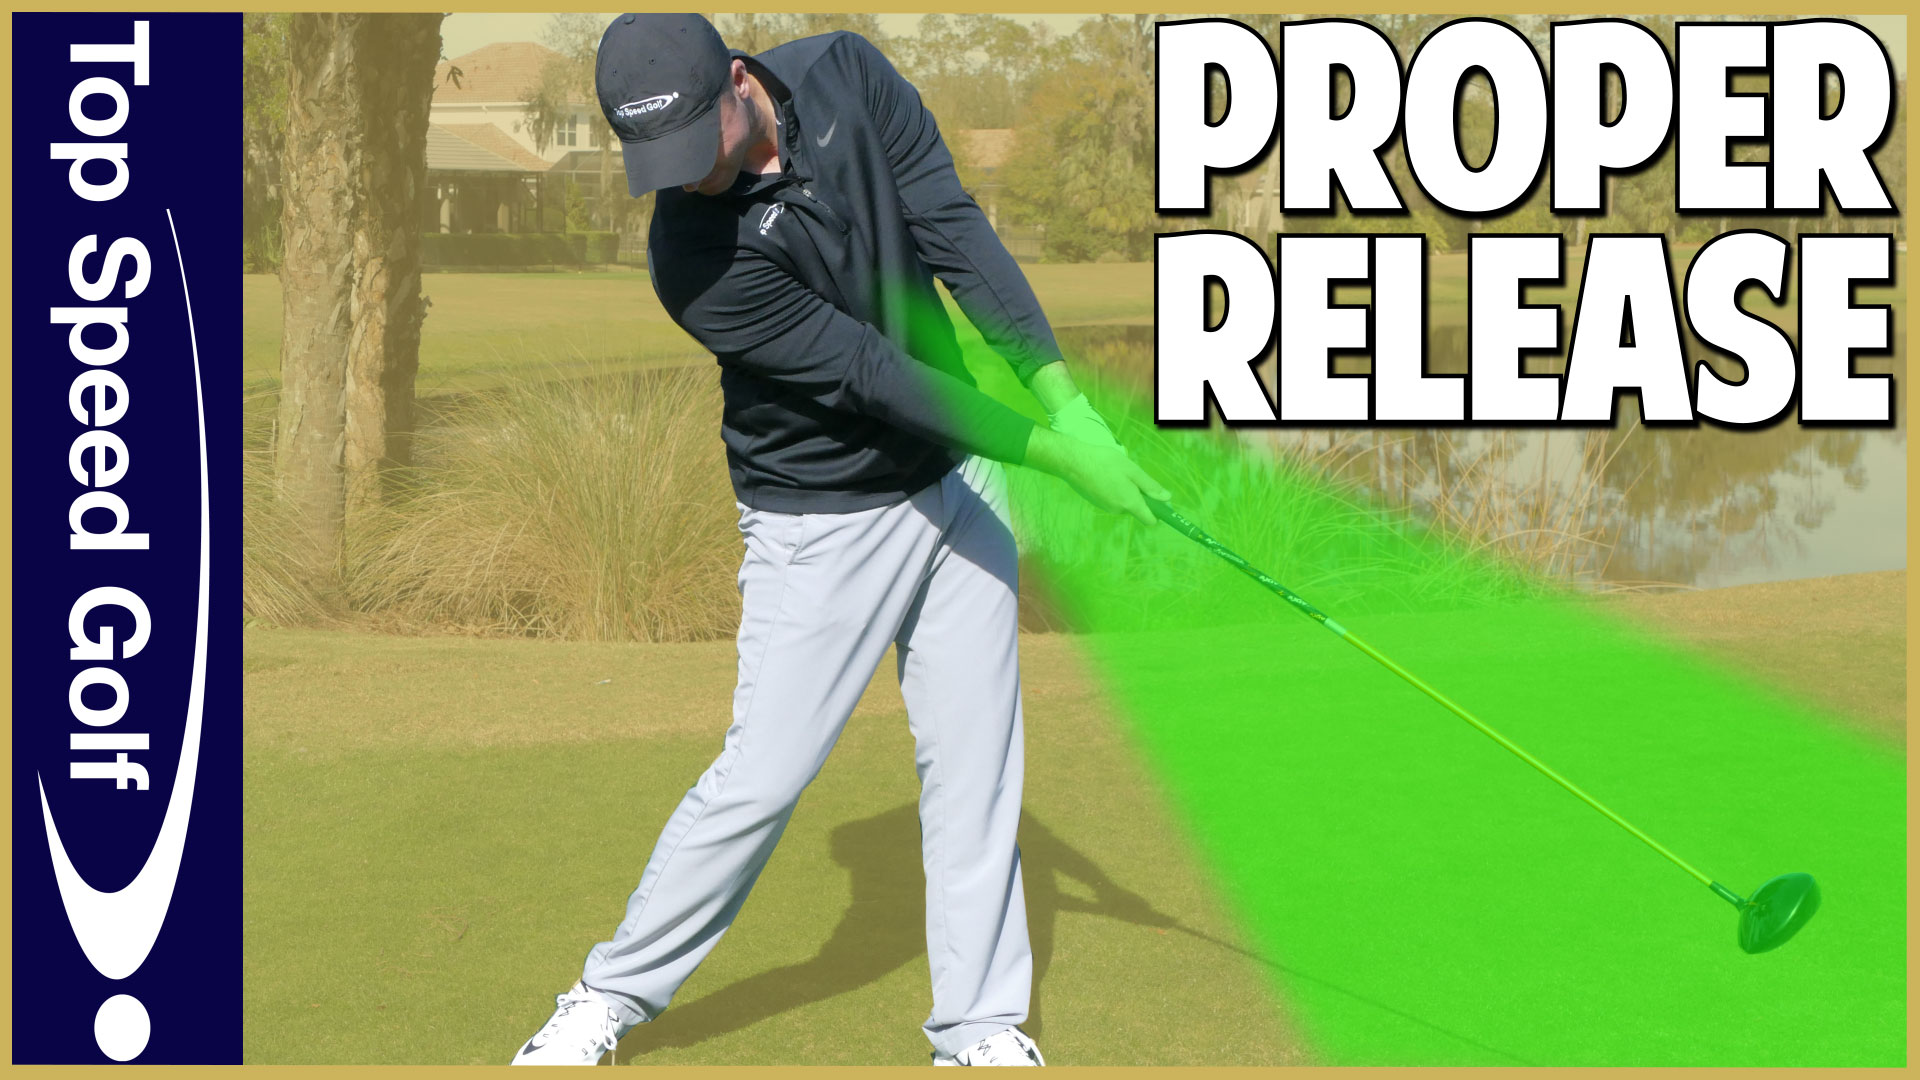 How to Fix a Bad Golf Swing
